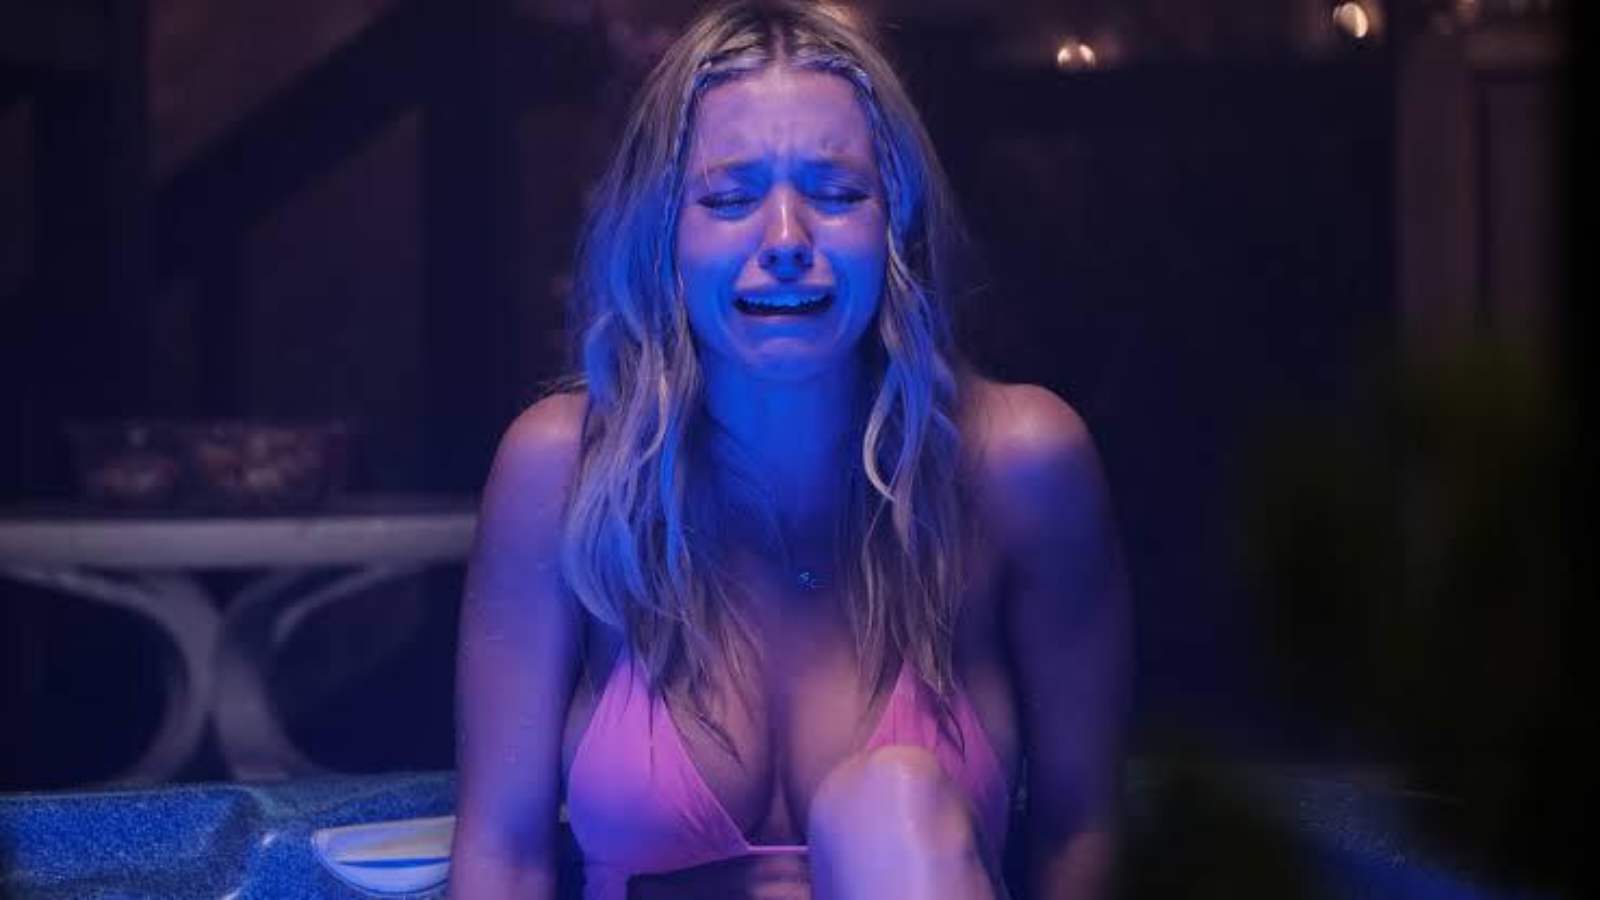 Sydney Sweeney reveals that the hot tub vomit scene made her anxious